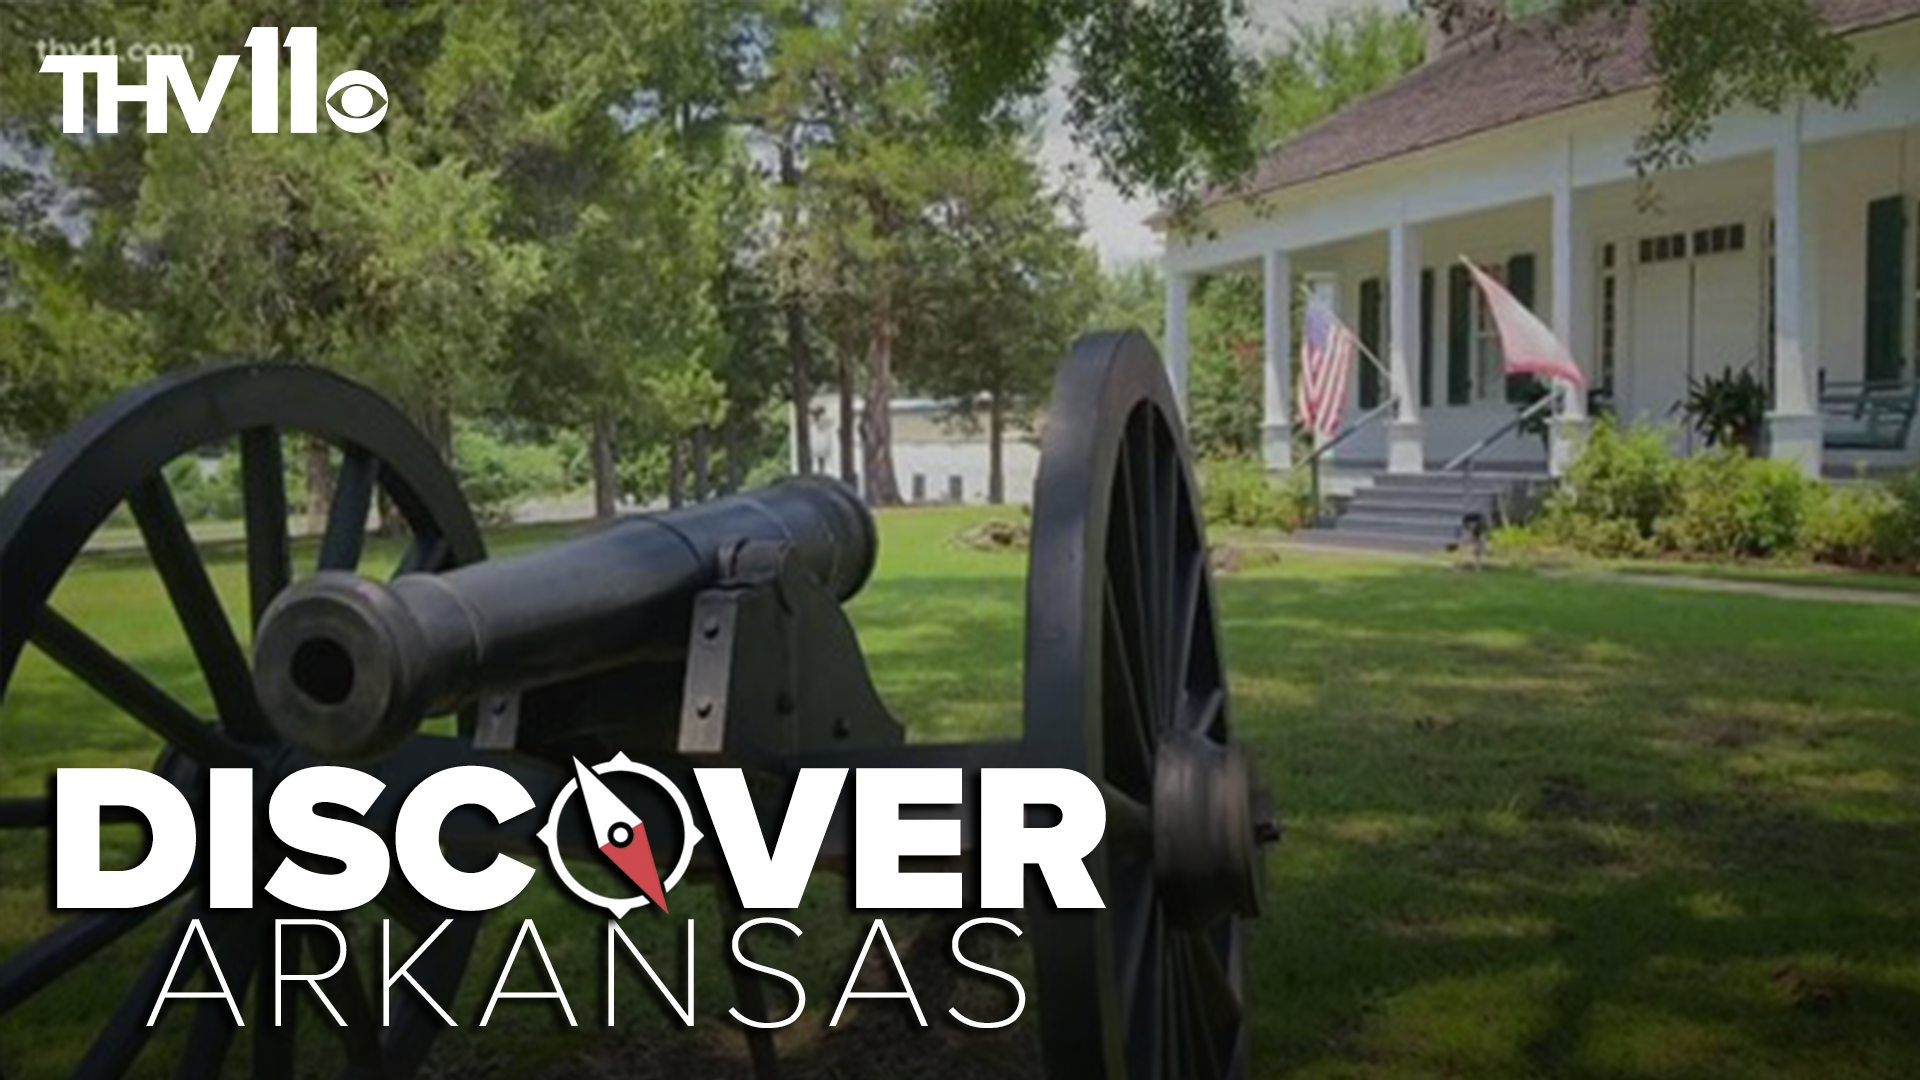 Arkansas is rich in history. In fact, there's something new to learn in all 75 counties. But there's a special place in south Arkansas.